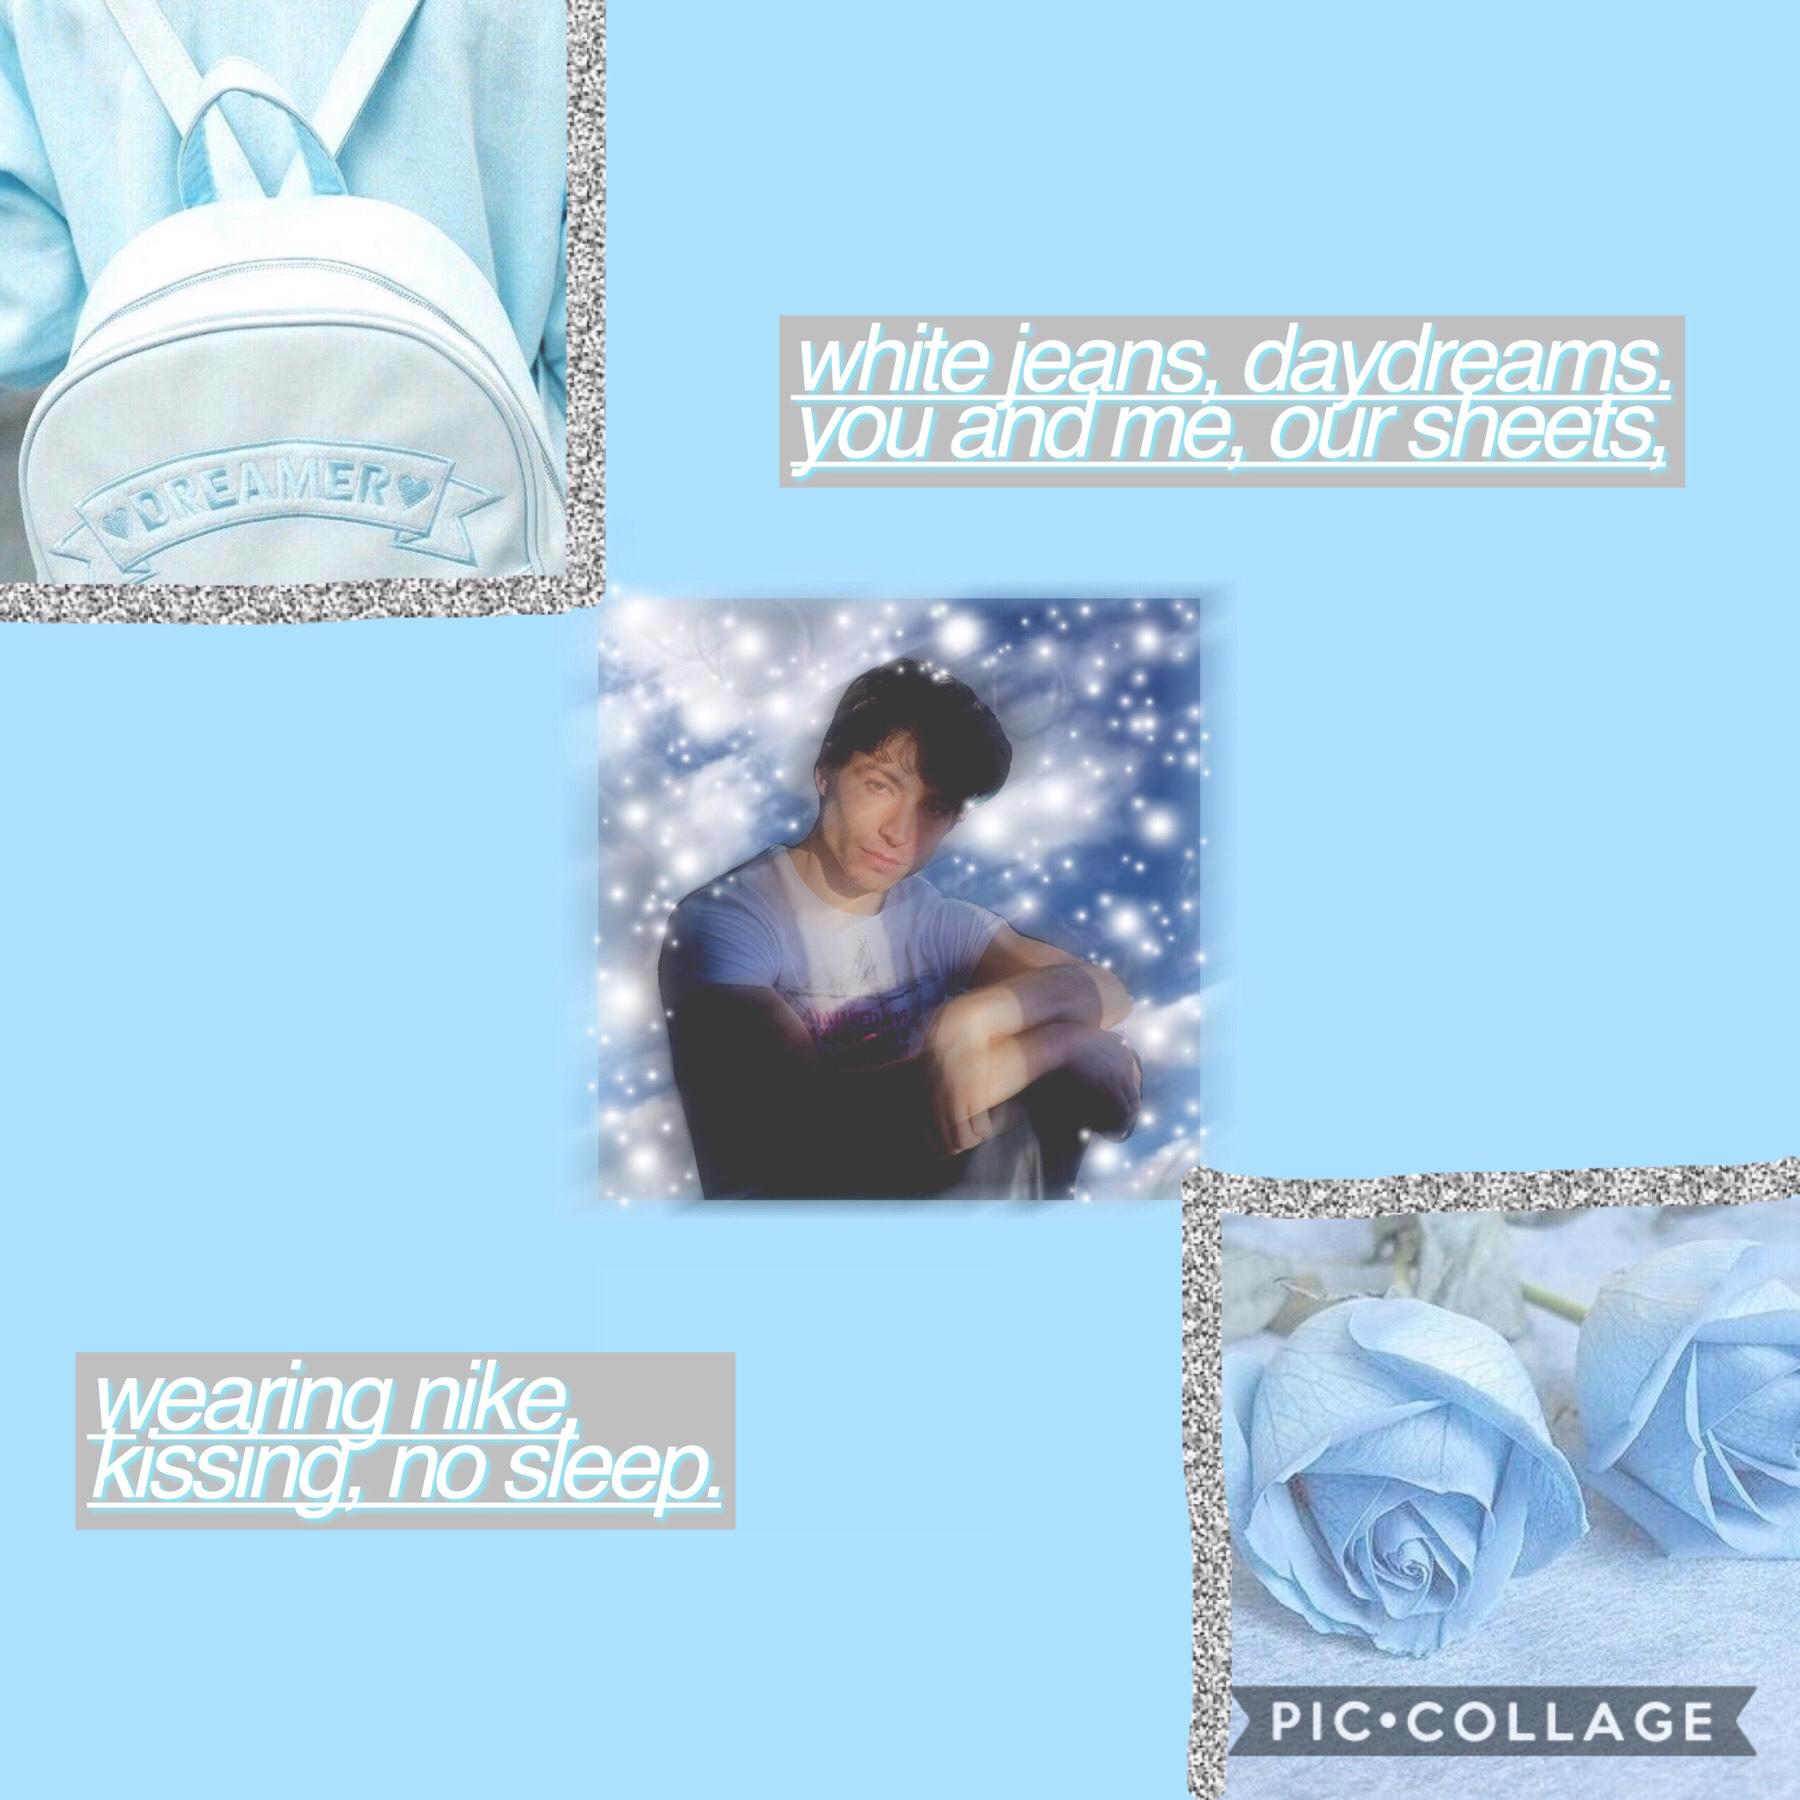 🦋 tap 🦋


hope you enjoy the first post of the theme :).
song: yea, babe, no way - LANY.
person: ezra miller.
apps used: picsart, LINE camera, phonto. 